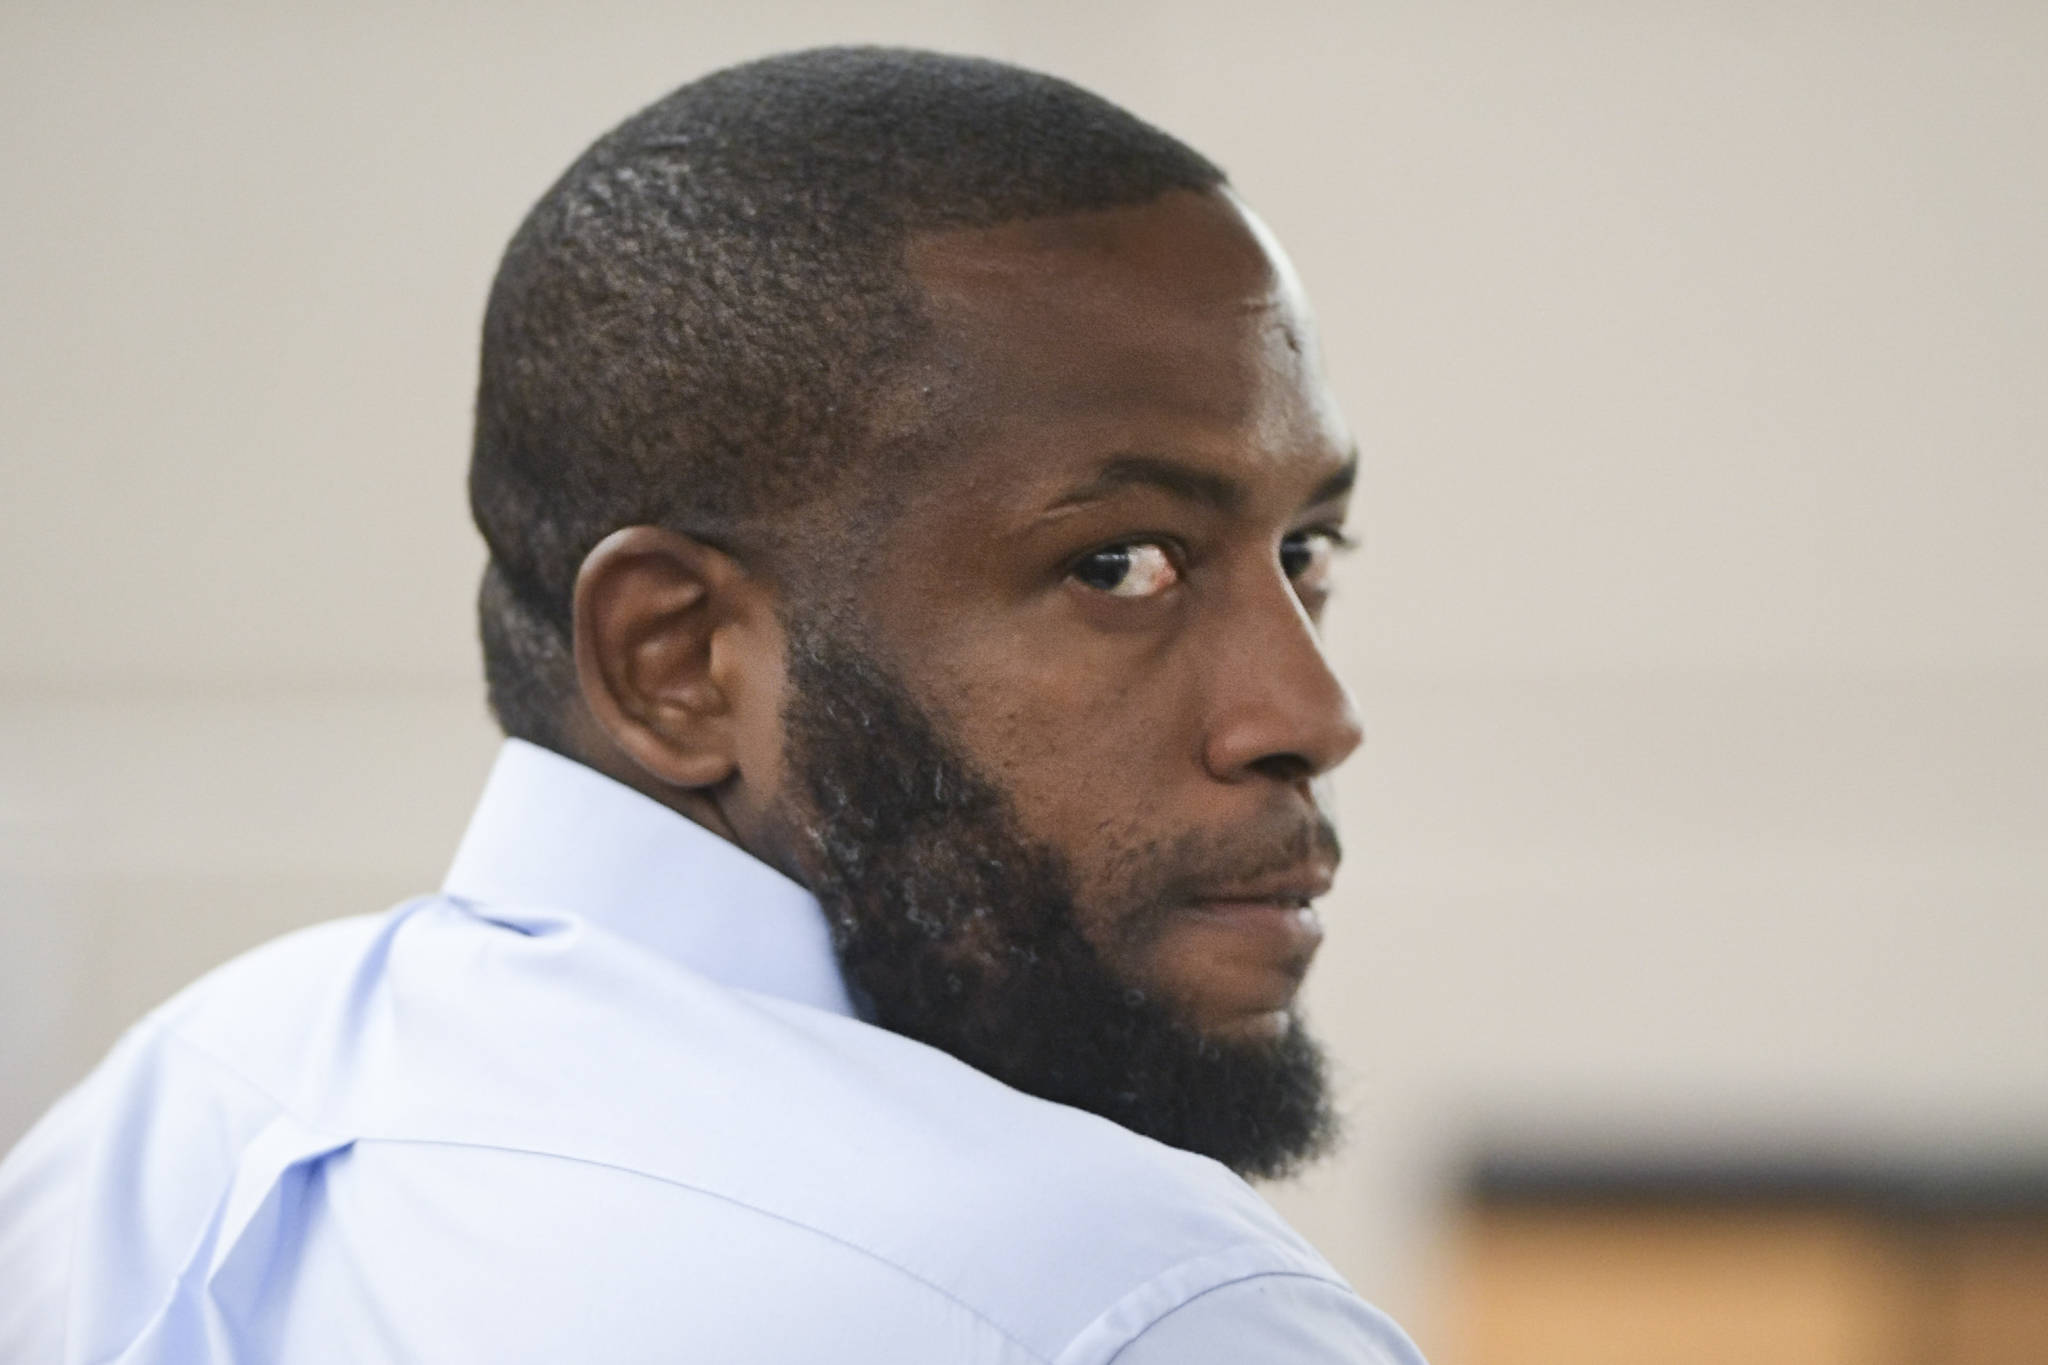 Laron Carlton Graham in Juneau Superior Court on Monday, Sept. 30, 2019. Graham is charged with two counts of first-degree murder for the November 2015 shooting deaths of 36-year-old Robert H. Meireis and 34-year-old Elizabeth K. Tonsmeire. (Michael Penn | Juneau Empire)